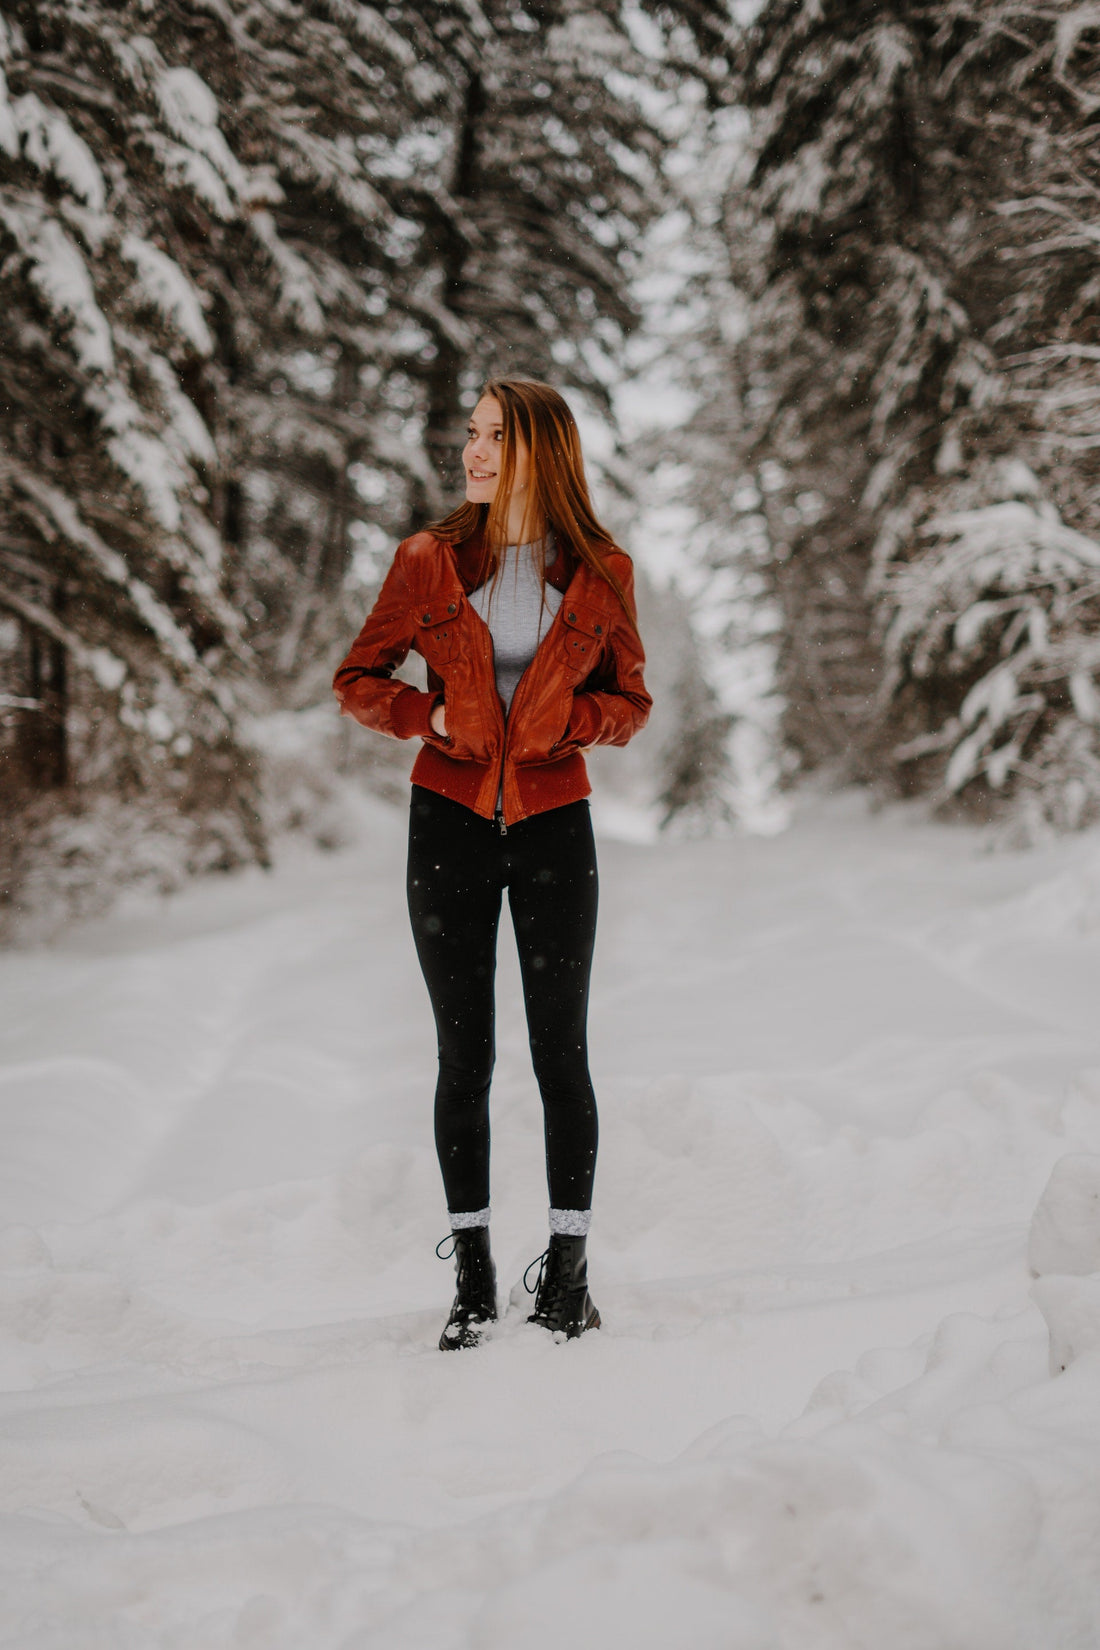 Stay Warm and Cozy with Fleece-Lined Leggings | Linions - Linions